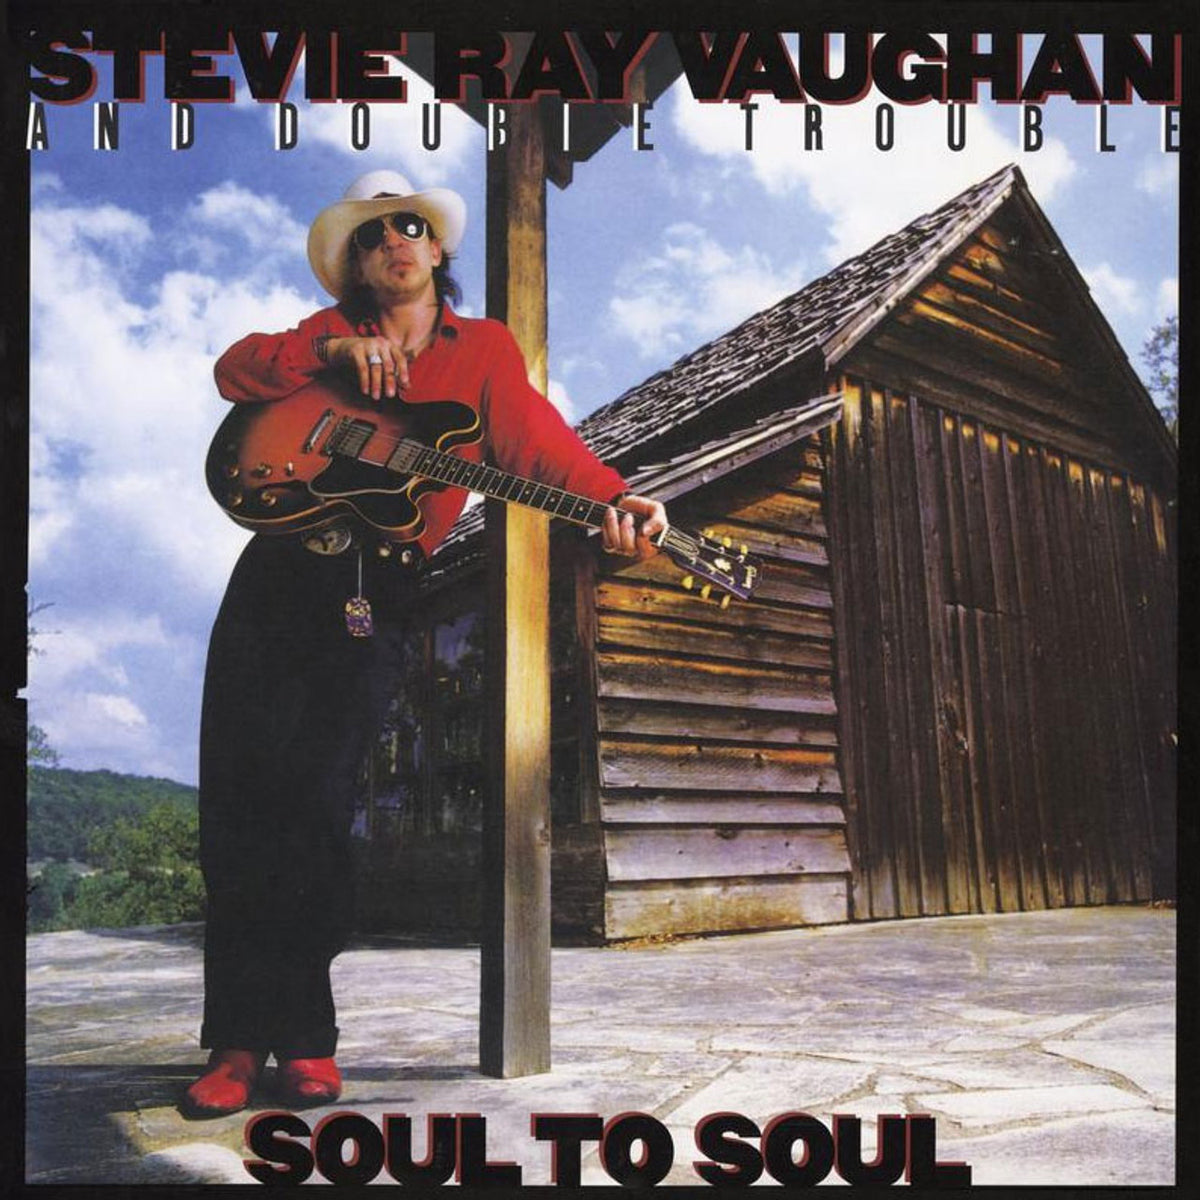 Stevie Ray Vaughan And Double Trouble - Soul To Soul 2LP (2LP 45rpm Analogue Productions reissue)